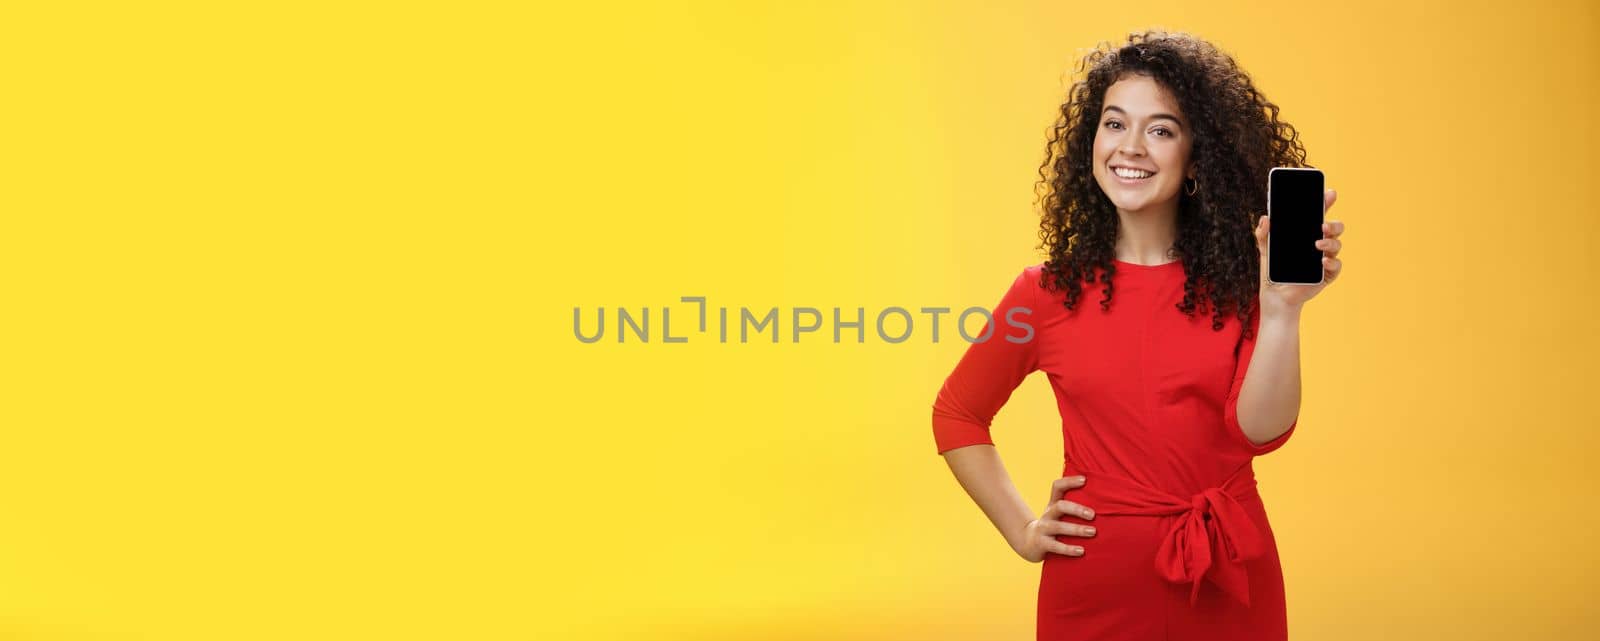 Girl brag with new phone she got on christmas feeling delighted holding mobile device in hand showing smartphone screena t camera, smiling broadly with uplifted mood over yellow background by Benzoix